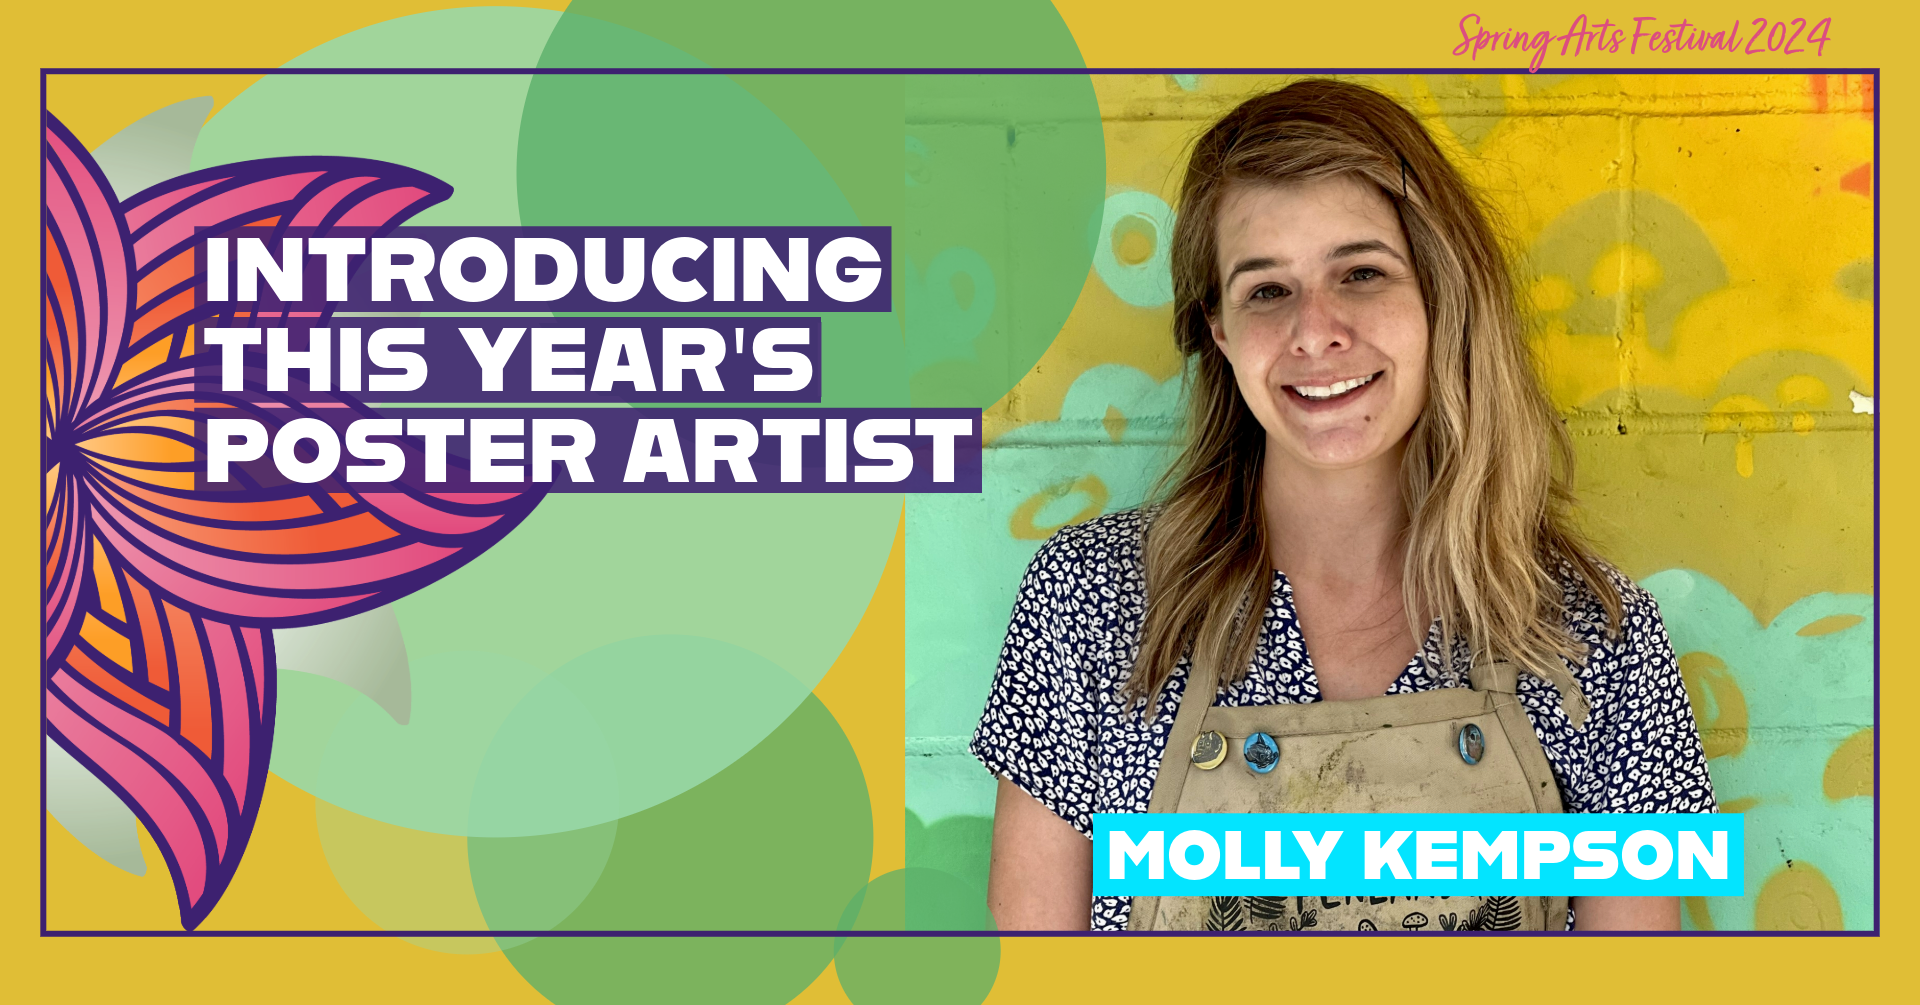 A graphic with the text "Introducing This Year's Poster Artist" to the right of Molly Kempson